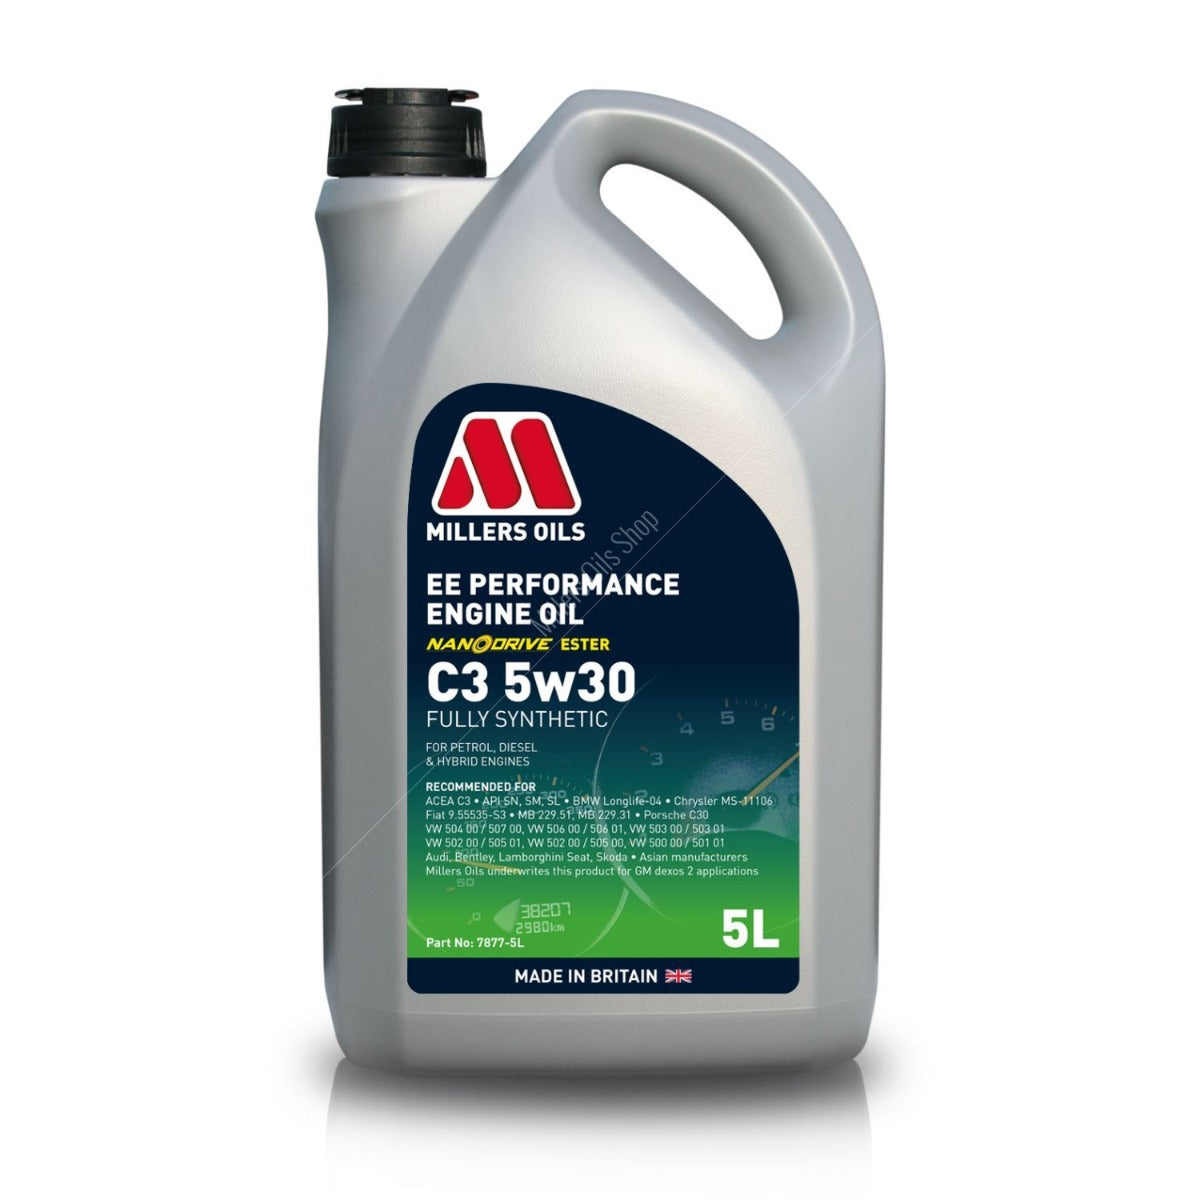 Millers EE Performance C3 5w30 Engine Oil (5L)